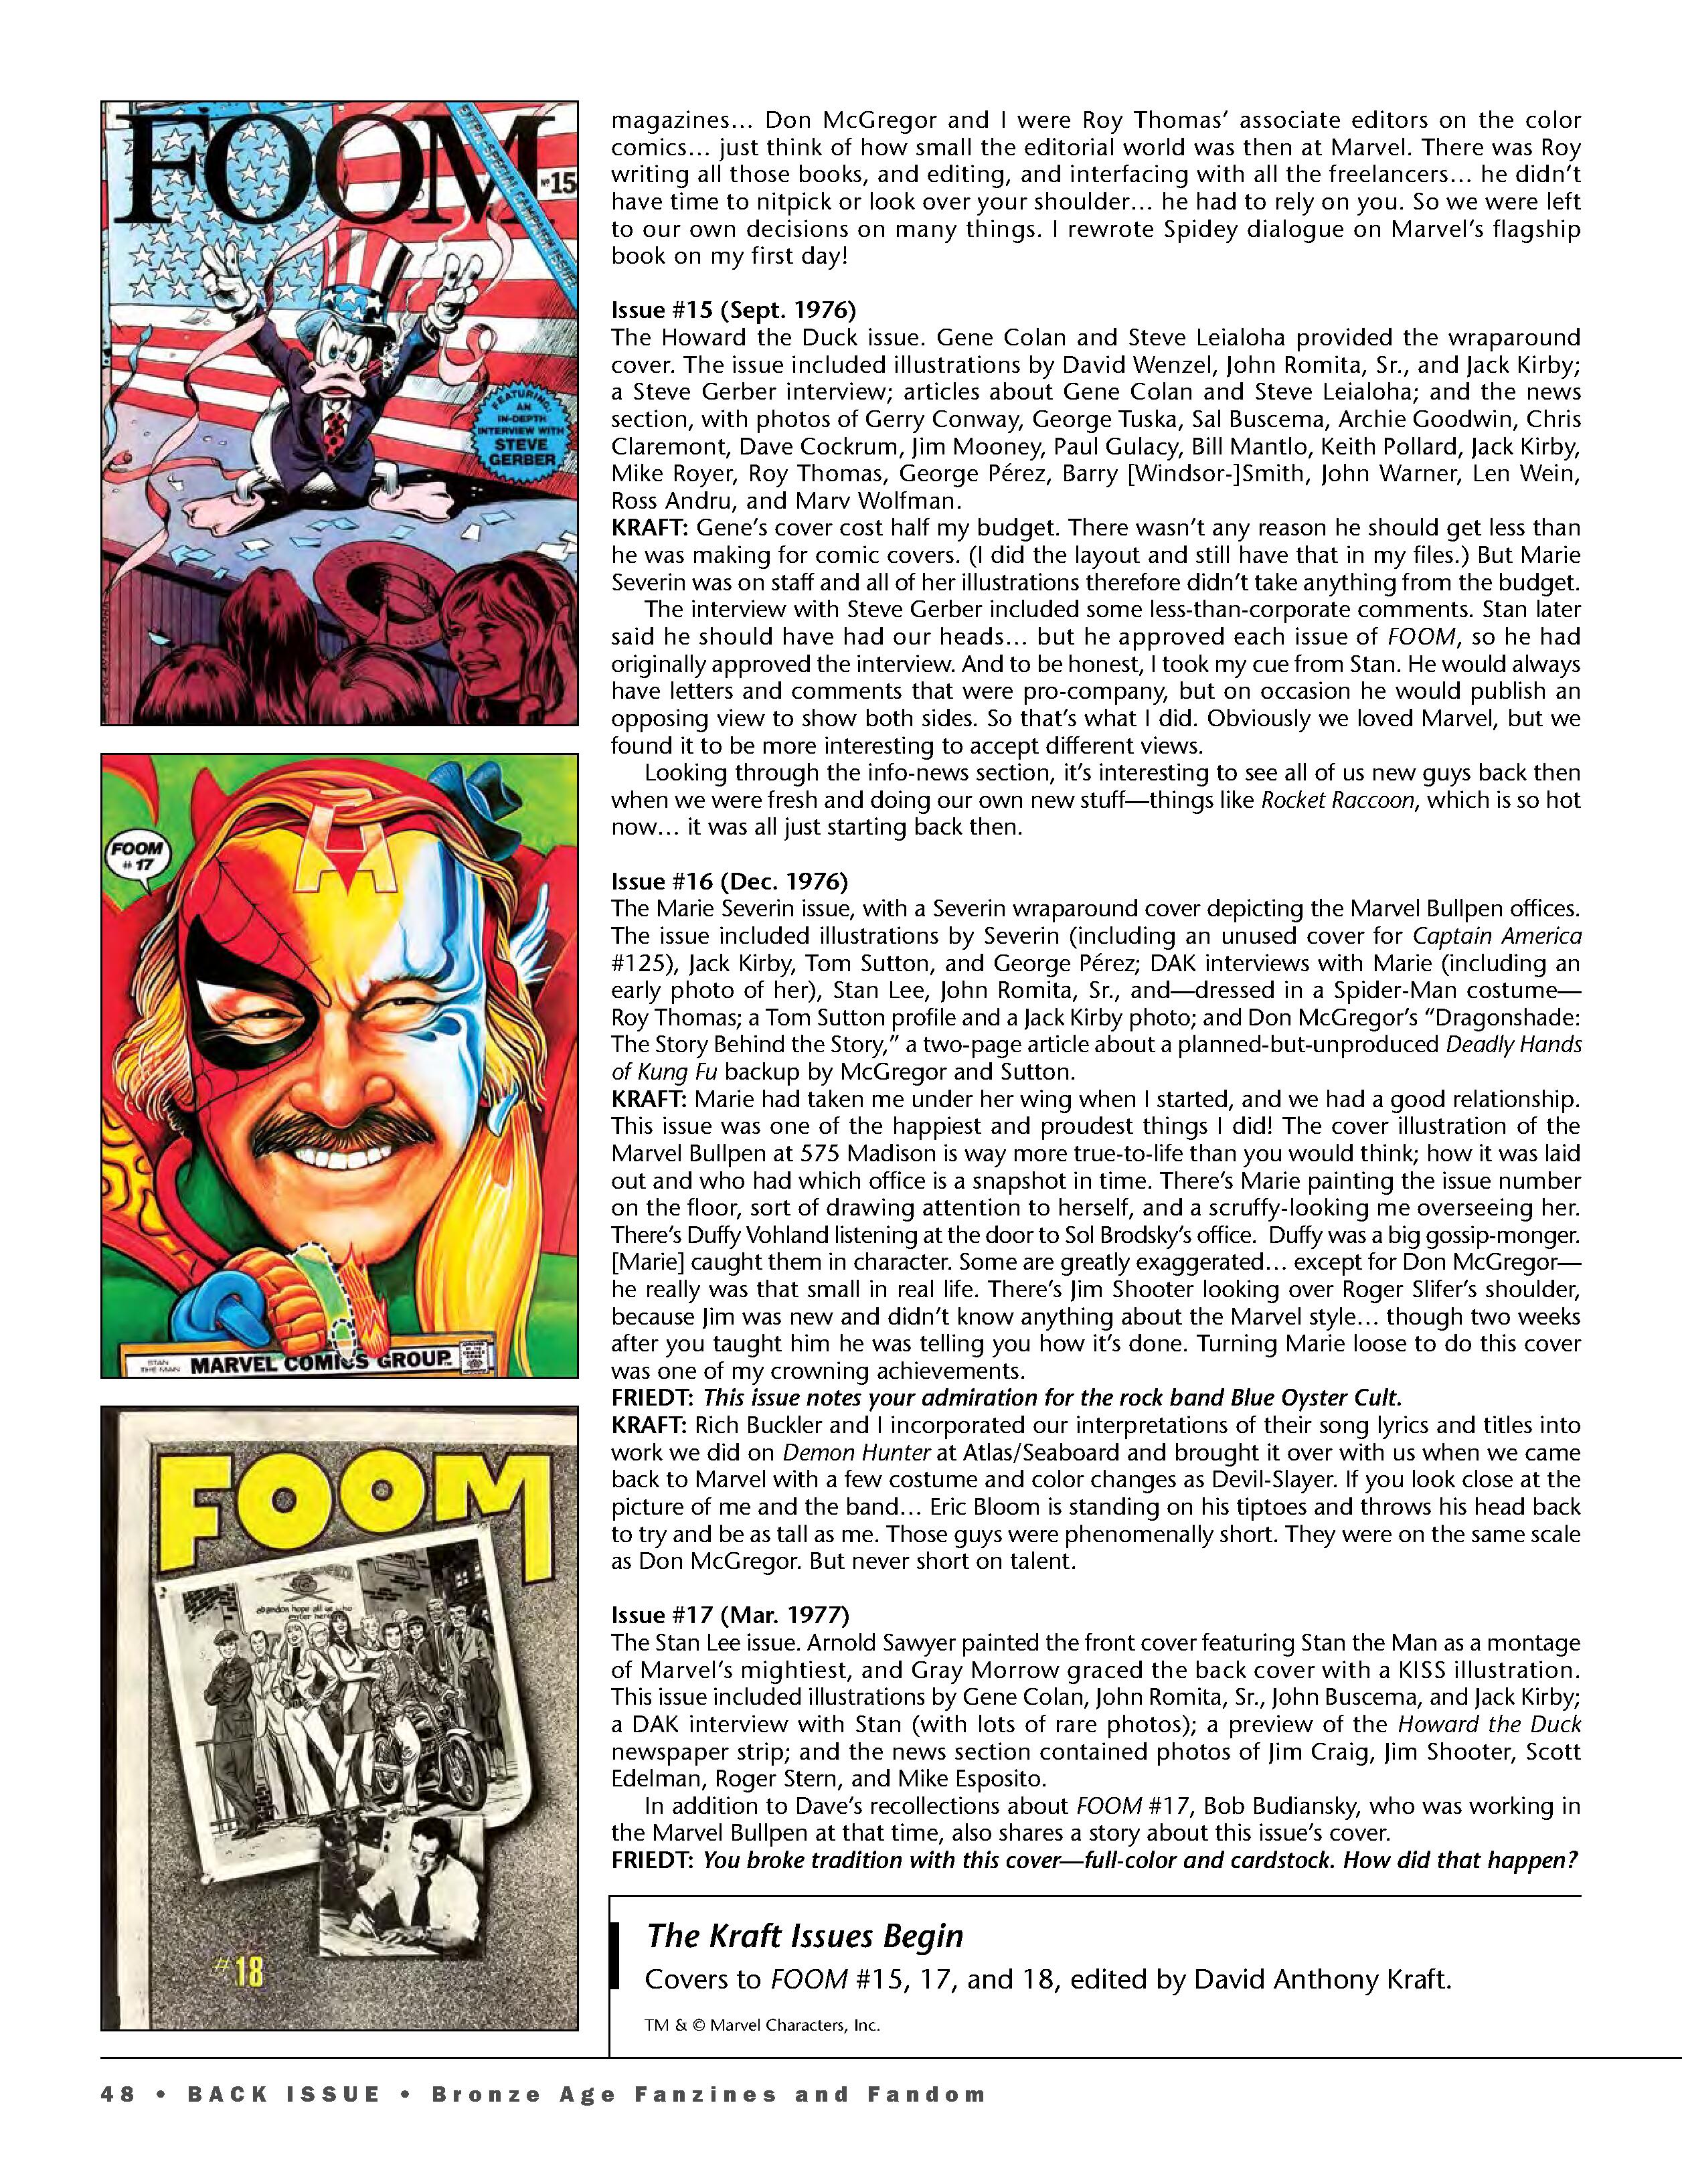 Read online Back Issue comic -  Issue #100 - 50